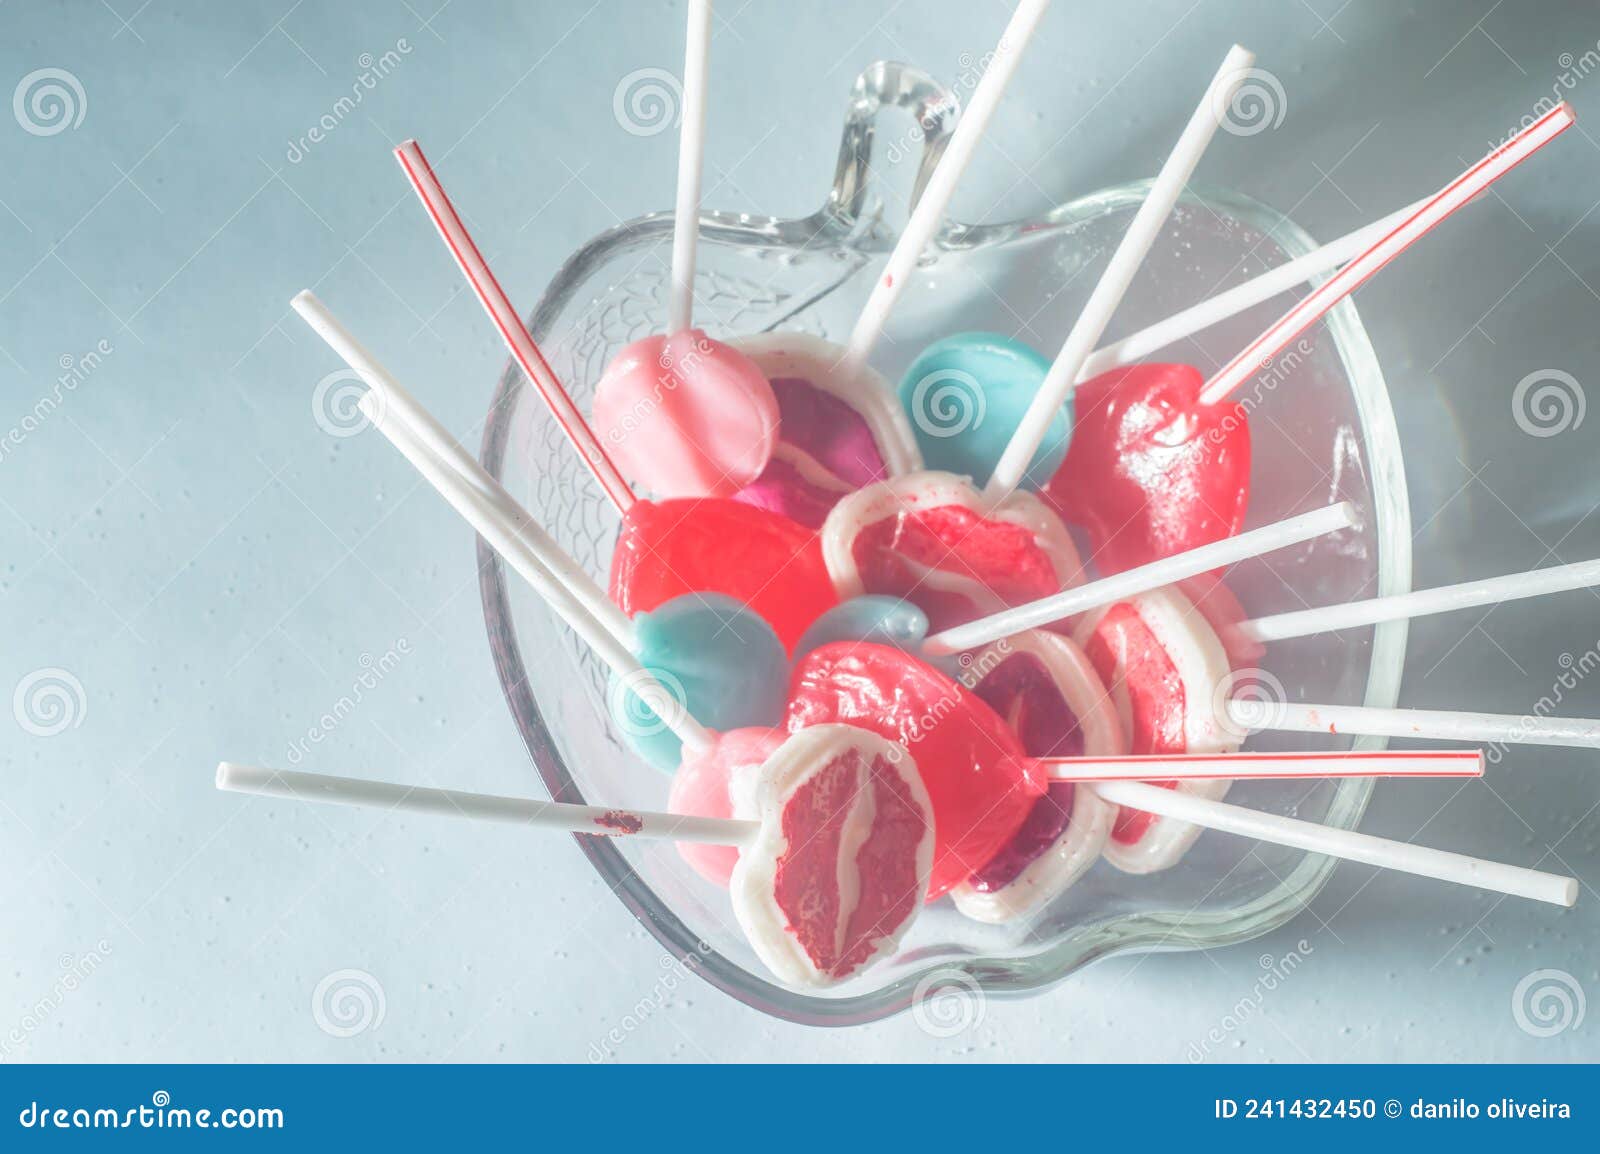 various lollipops in a transparente bowl with light blue background